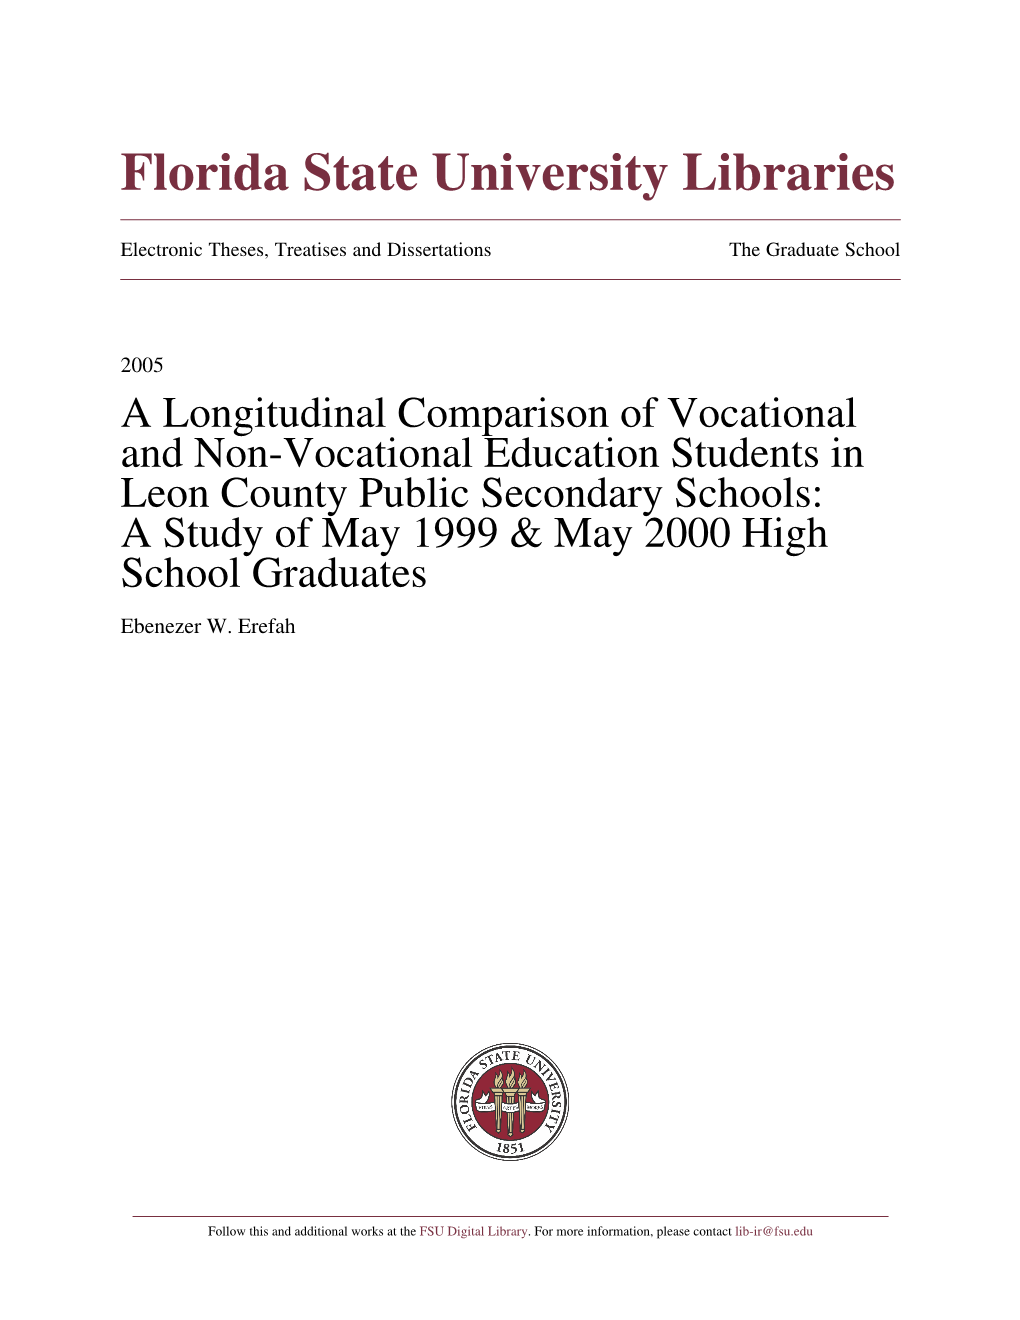 A Longitudinal Comparison of Vocational and Non-Vocational